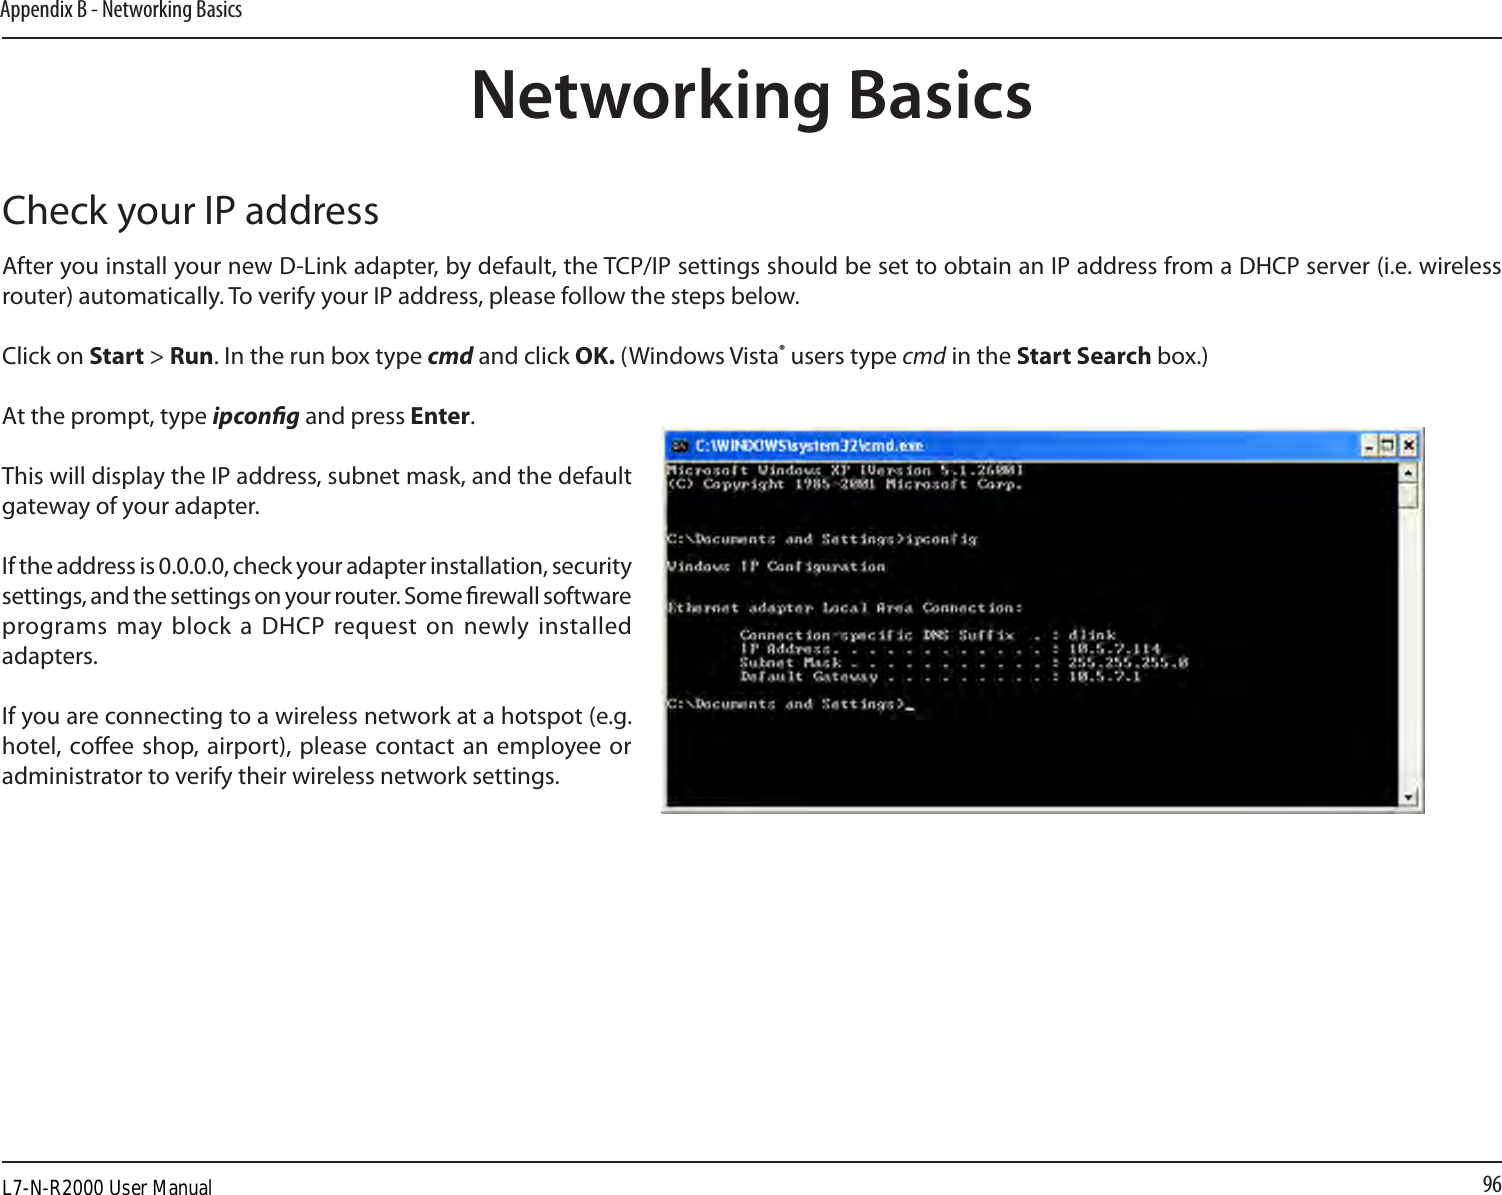 96Appendix B - Networking BasicsNetworking BasicsCheck your IP addressAfter you install your new D-Link adapter, by default, the TCP/IP settings should be set to obtain an IP address from a DHCP server (i.e. wireless router) automatically. To verify your IP address, please follow the steps below.Click on Start &gt; Run. In the run box type cmd and click OK. (Windows Vista® users type cmd in the Start Search box.)At the prompt, type ipcong and press Enter.This will display the IP address, subnet mask, and the default gateway of your adapter.If the address is 0.0.0.0, check your adapter installation, security settings, and the settings on your router. Some rewall software programs may block  a DHCP request on  newly installed adapters. If you are connecting to a wireless network at a hotspot (e.g. hotel, coee shop, airport), please  contact an employee  or administrator to verify their wireless network settings.L7-N-R2000 User Manual